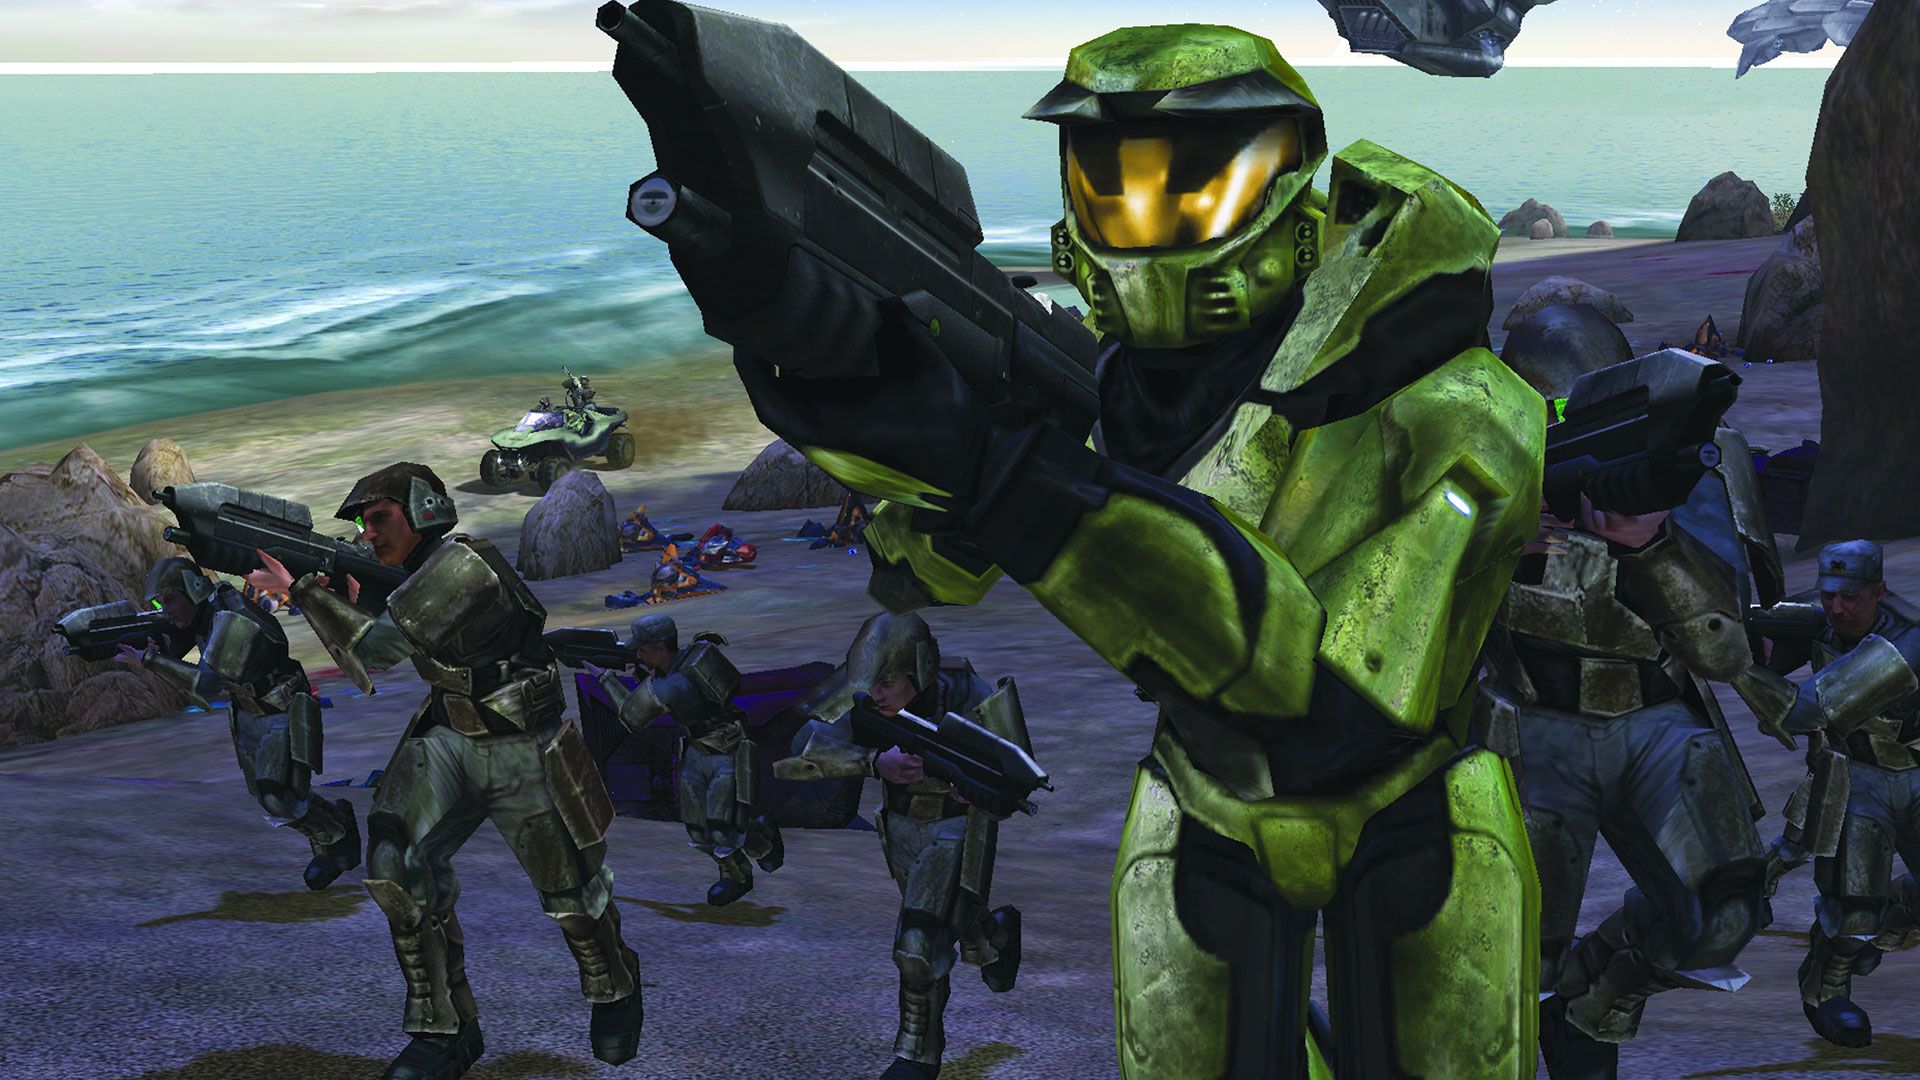 Halo: Combat Evolved | Games | Halo - Official Site